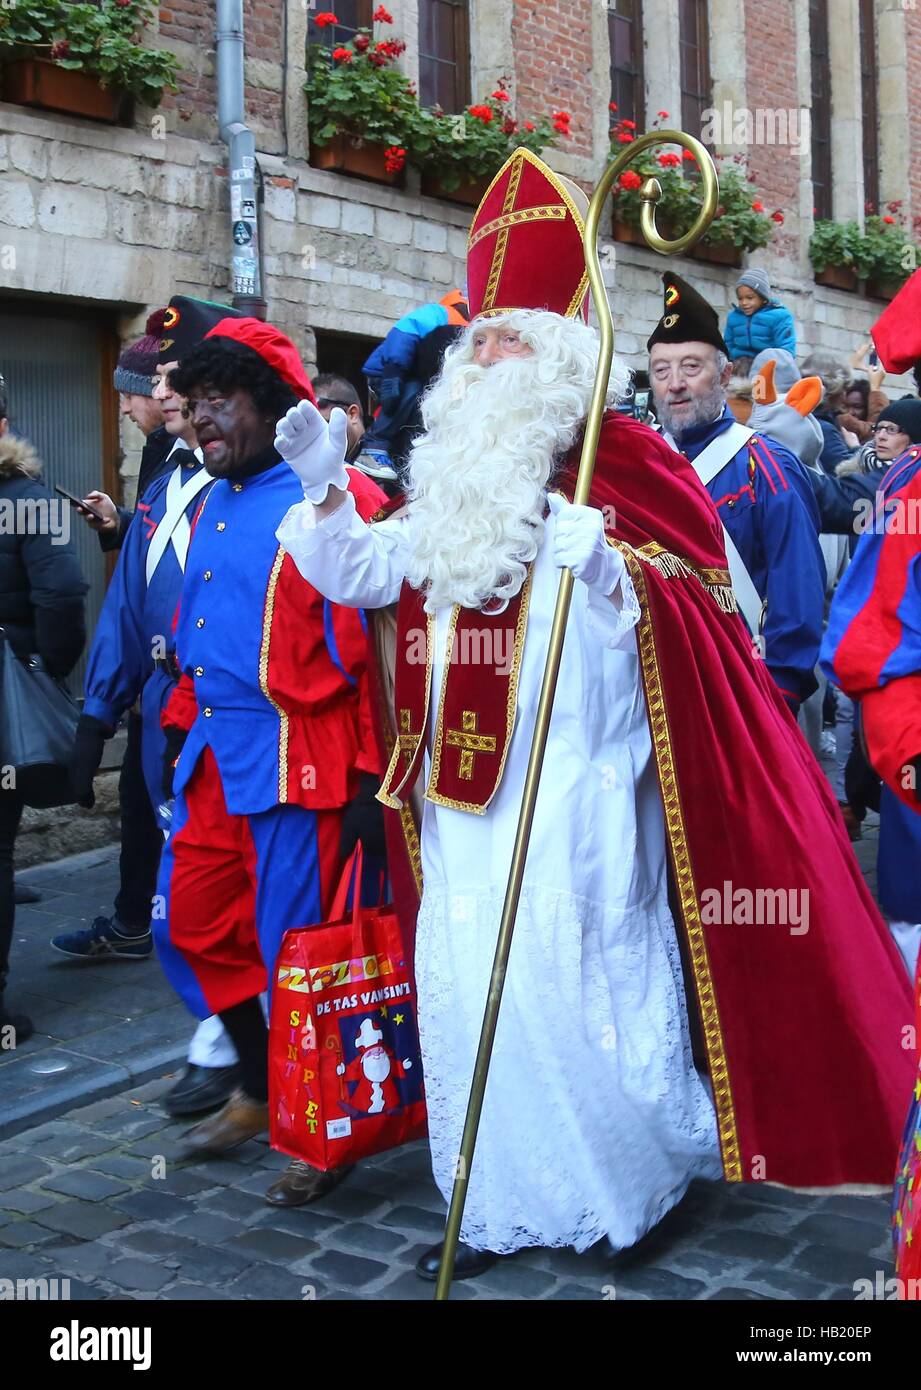 Brussels, Belgium. 3rd Dec, 2016. 'Saint-Nicolas' and his helpers participate in the Saint-Nicolas Parade in Brussels, Belgium, Dec. 3, 2016. Saint-Nicolas, who is one of the sources of the popular Christmas icon of Santa Claus, is celebrated annually on the Saint Nicholas Day. Credit:  Gong Bing/Xinhua/Alamy Live News Stock Photo